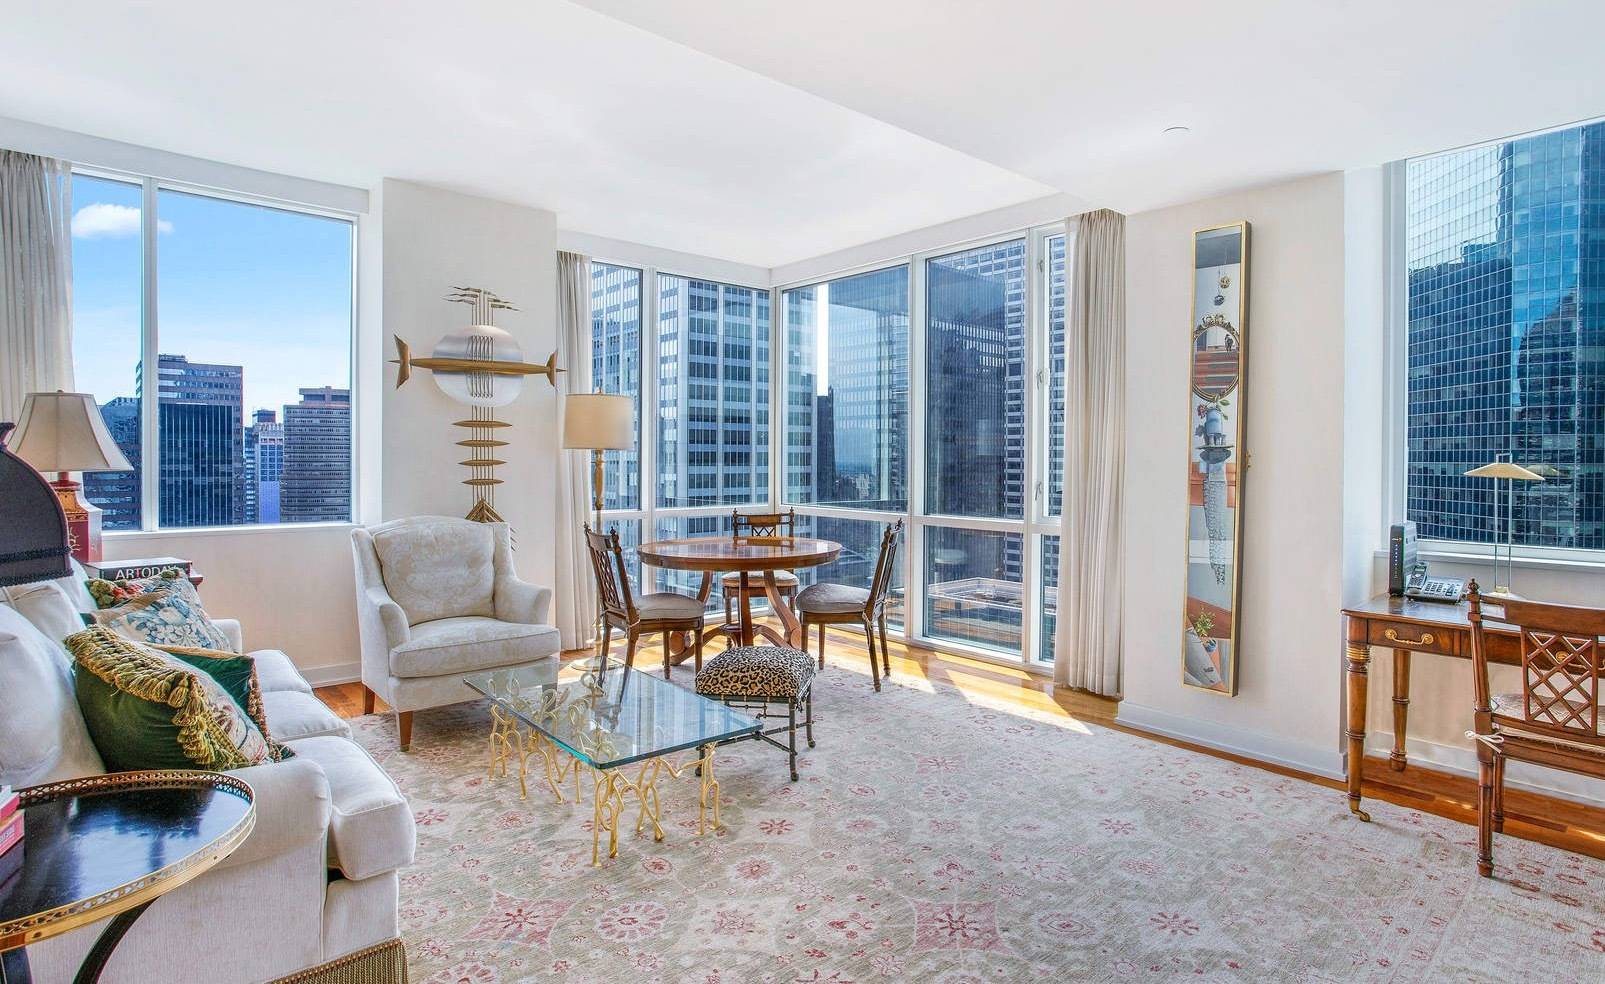 Located between Park and Madison Avenues in the heart of Midtown East, this apartment is sited at the epicenter of all things New York City !